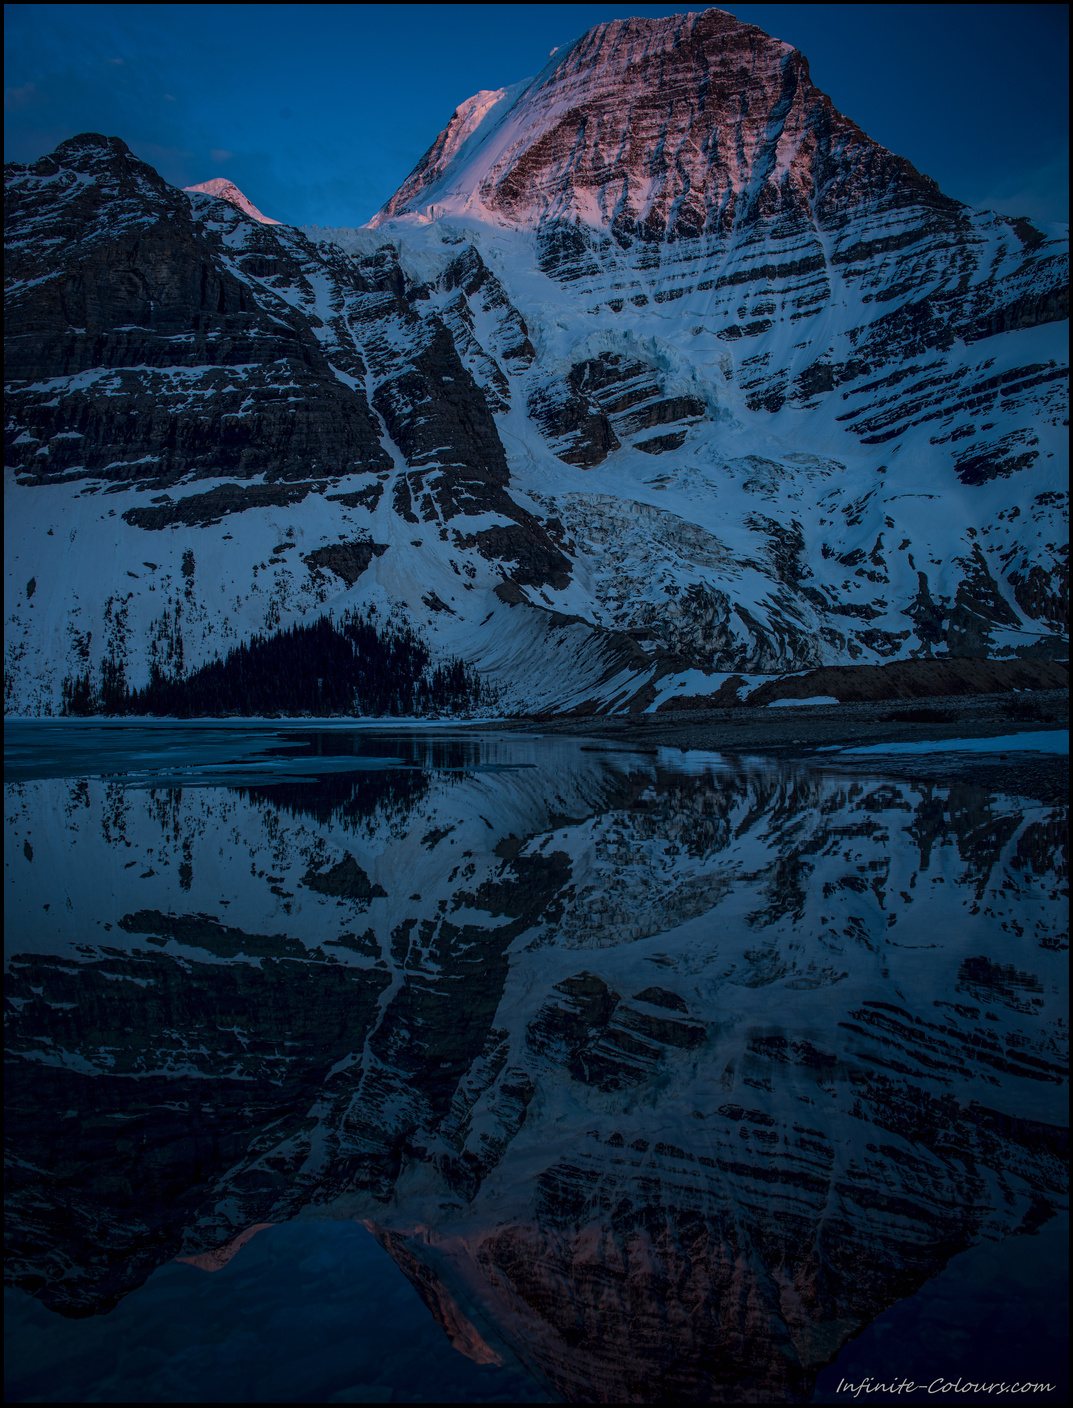 Mount Robson reflections at sunset, Berg Lake / Marmot campsite, Sony A7 / Canon FD Tilt Shift 35